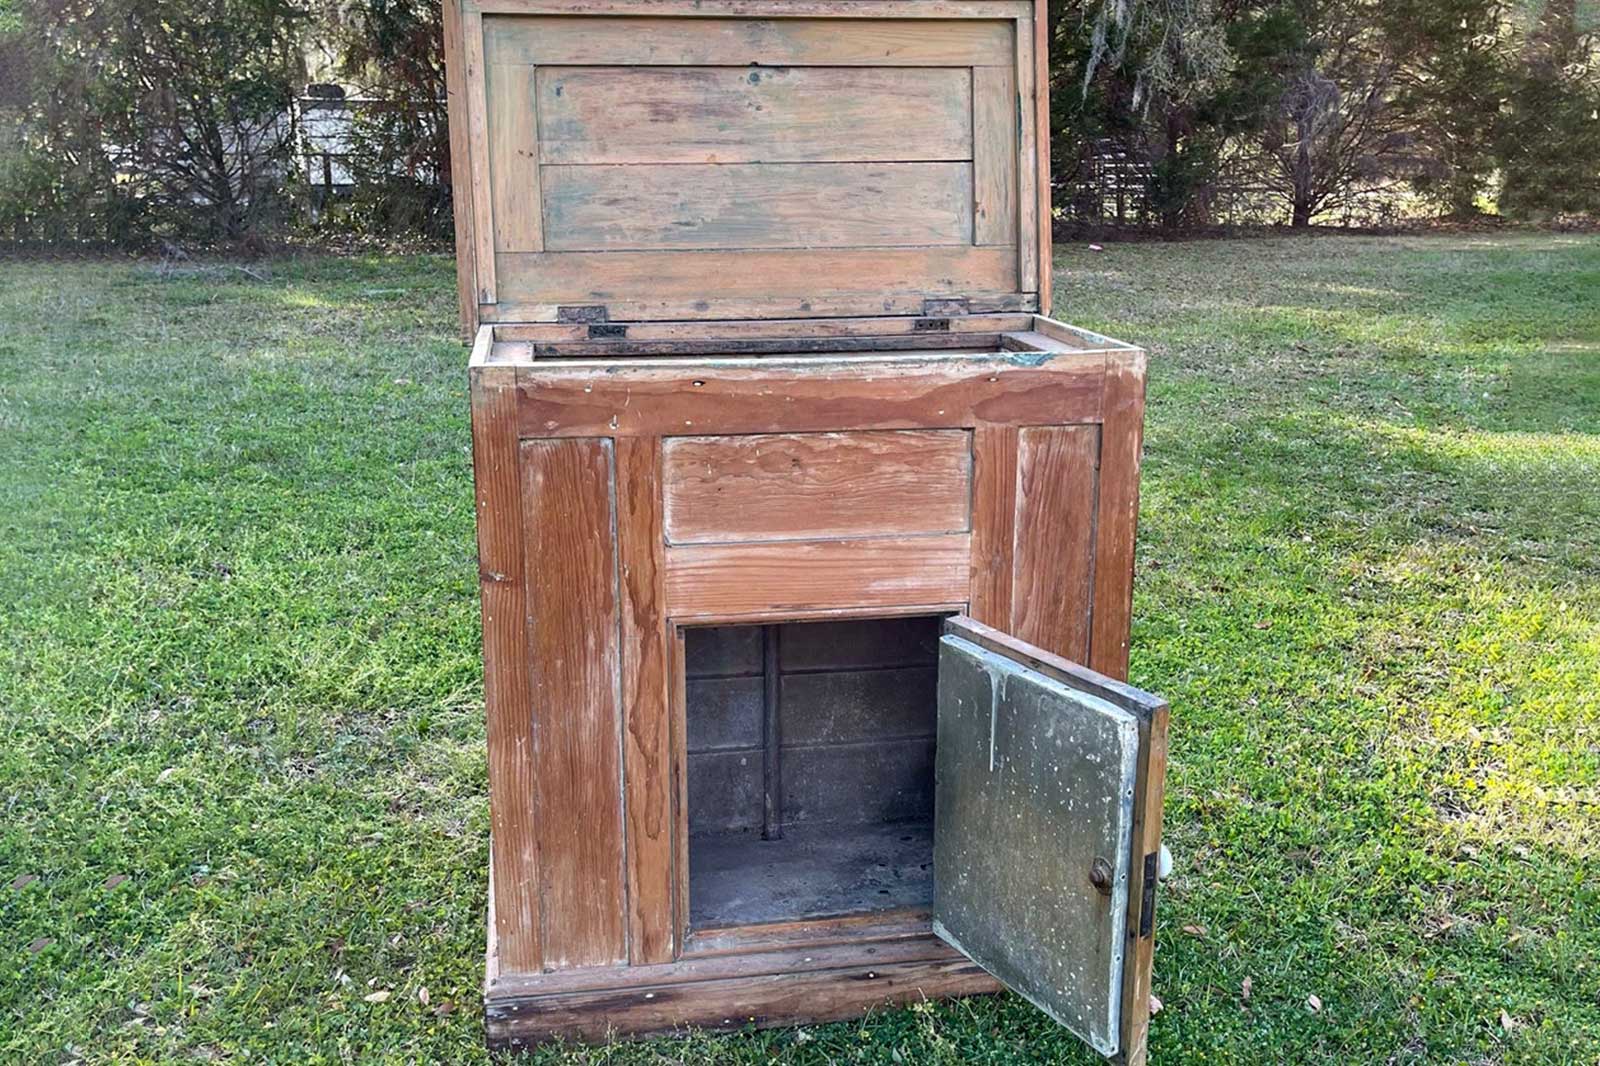 Exploring the Charming Nostalgia of the 19th Century Old-Fashioned Ice Box